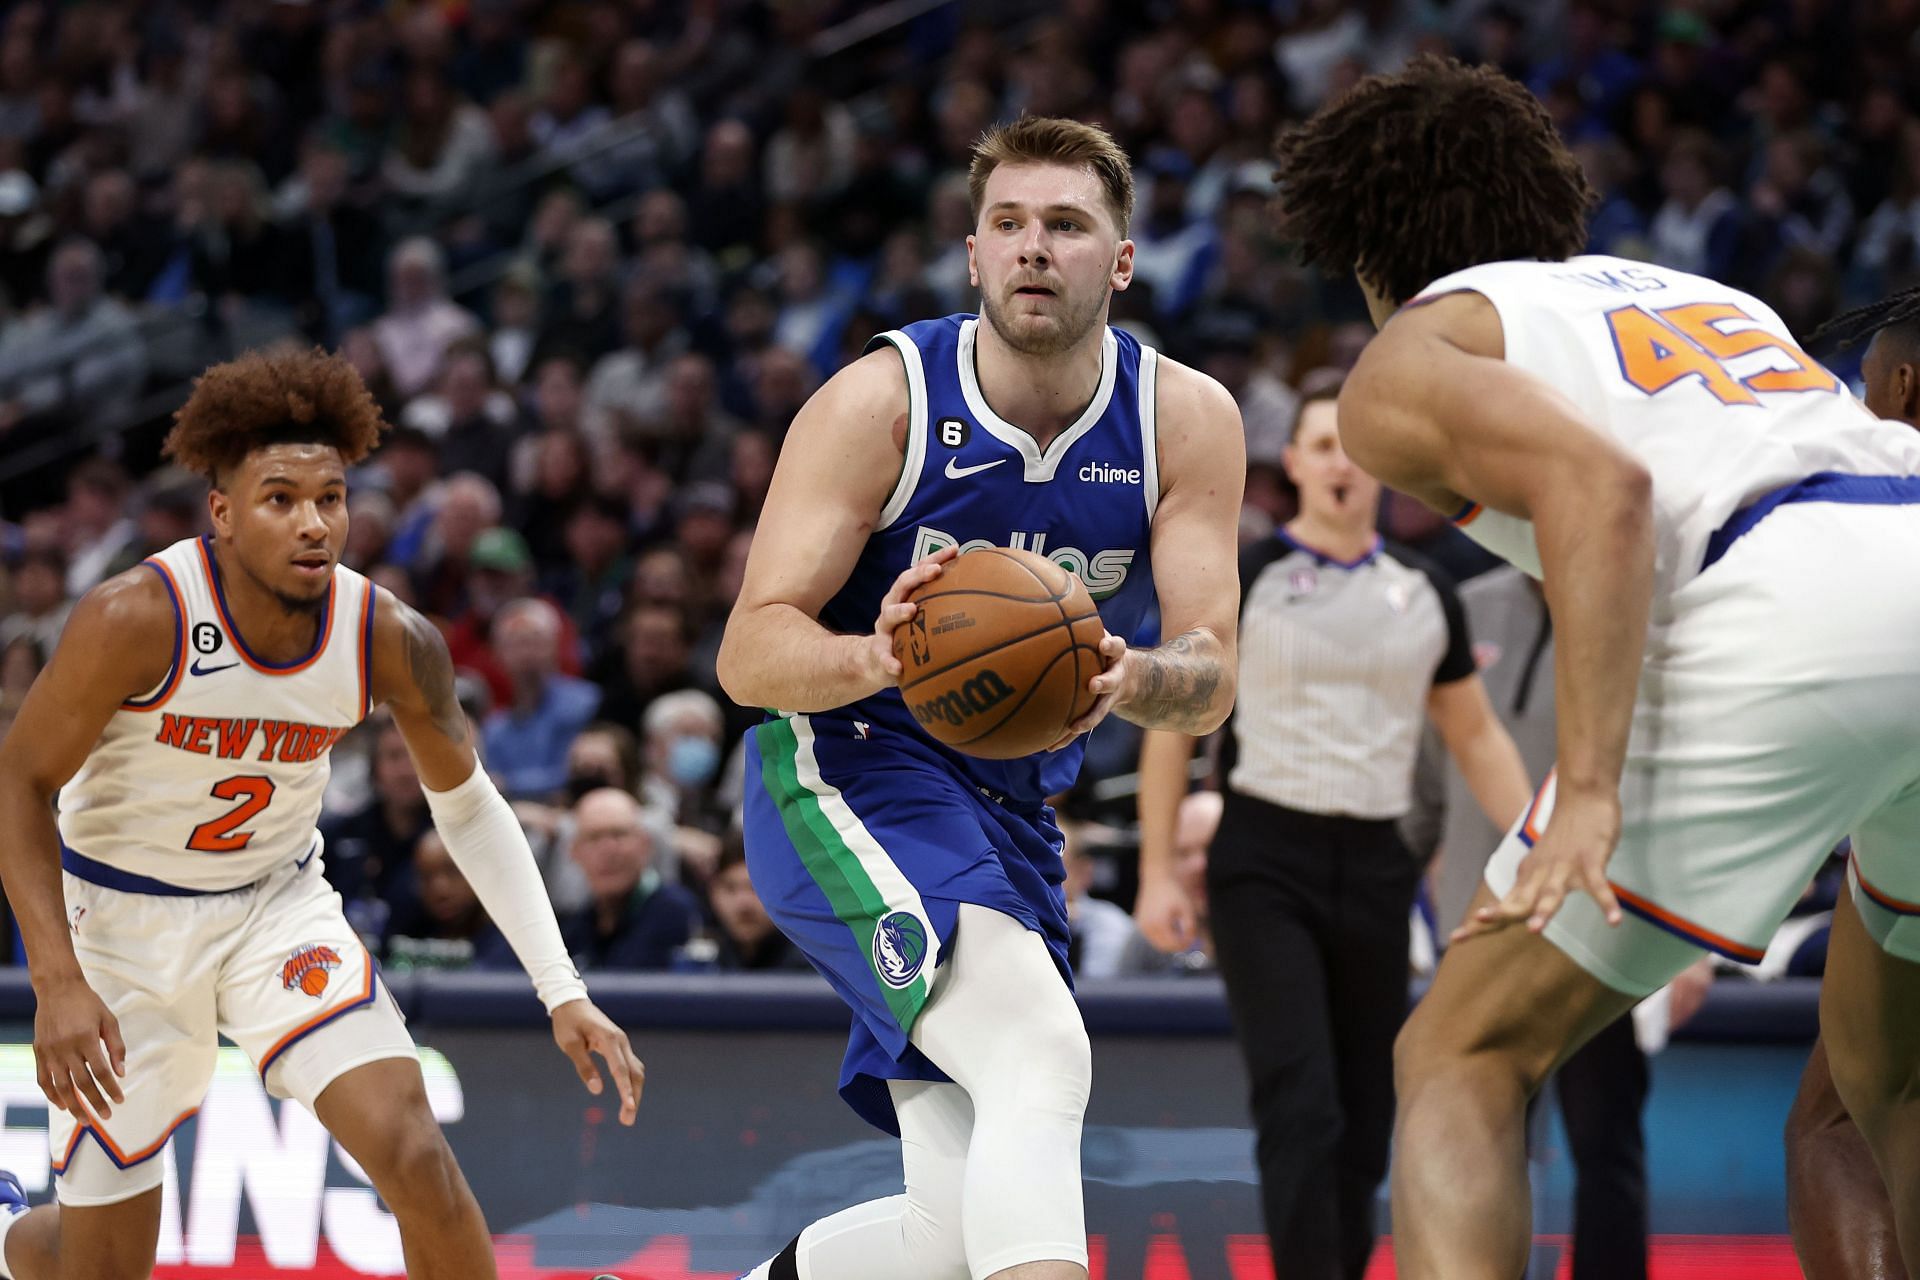 Luka Doncic of the Dallas Mavericks against the New York Knicks